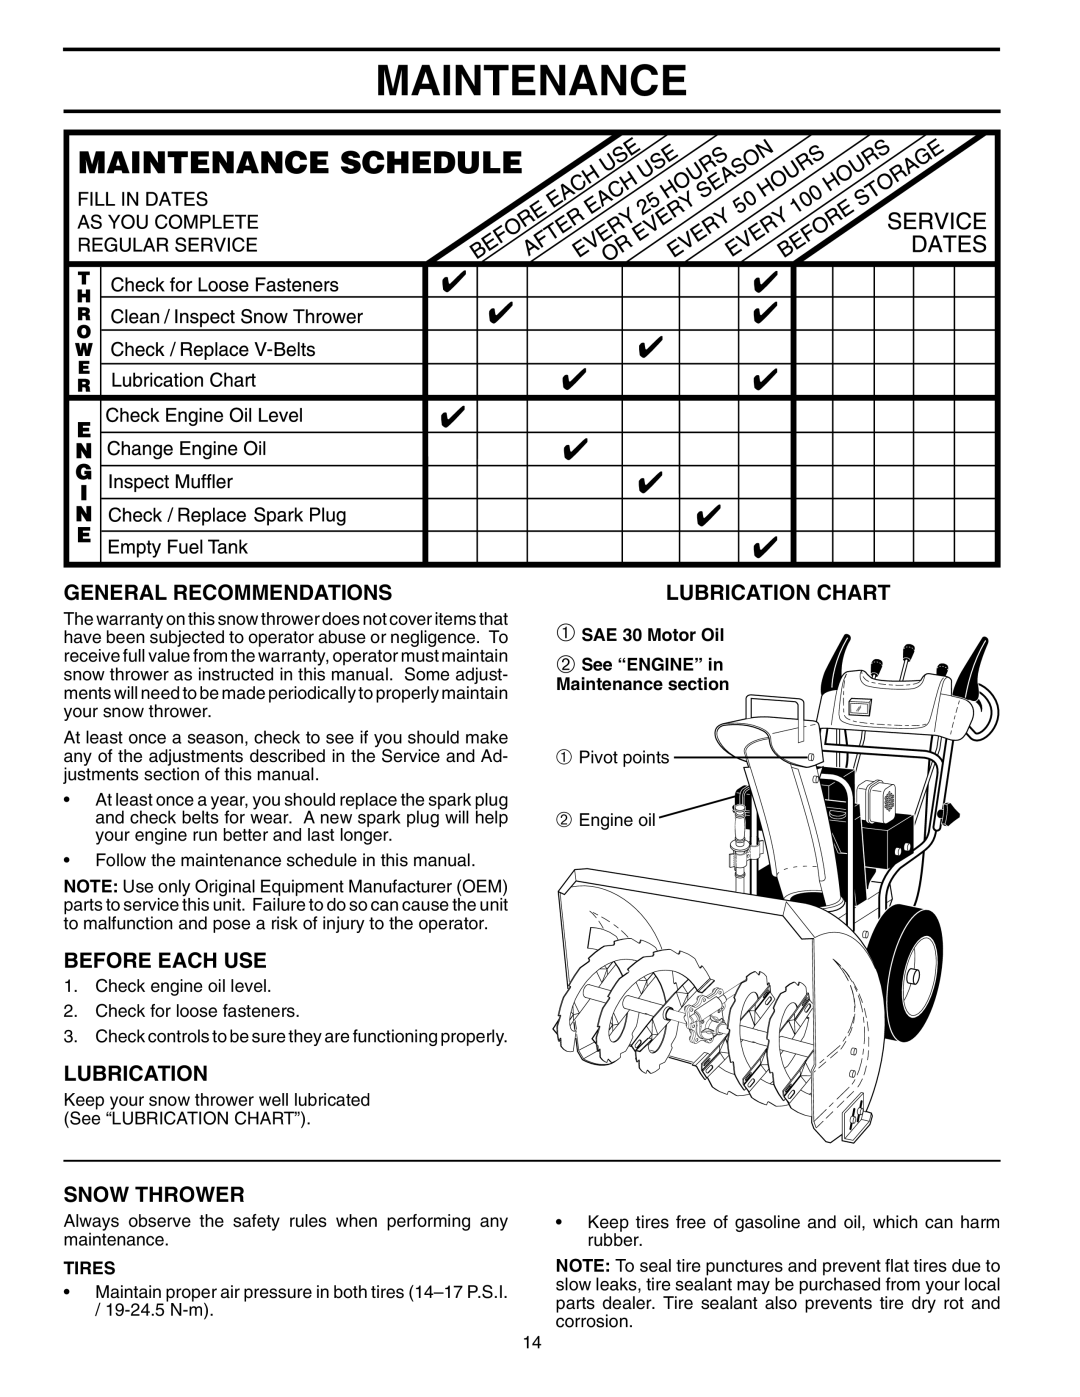 Husqvarna 10530SBE Maintenance, General Recommendations, Before Each Use, Snow Thrower, Lubrication Chart, Tires 